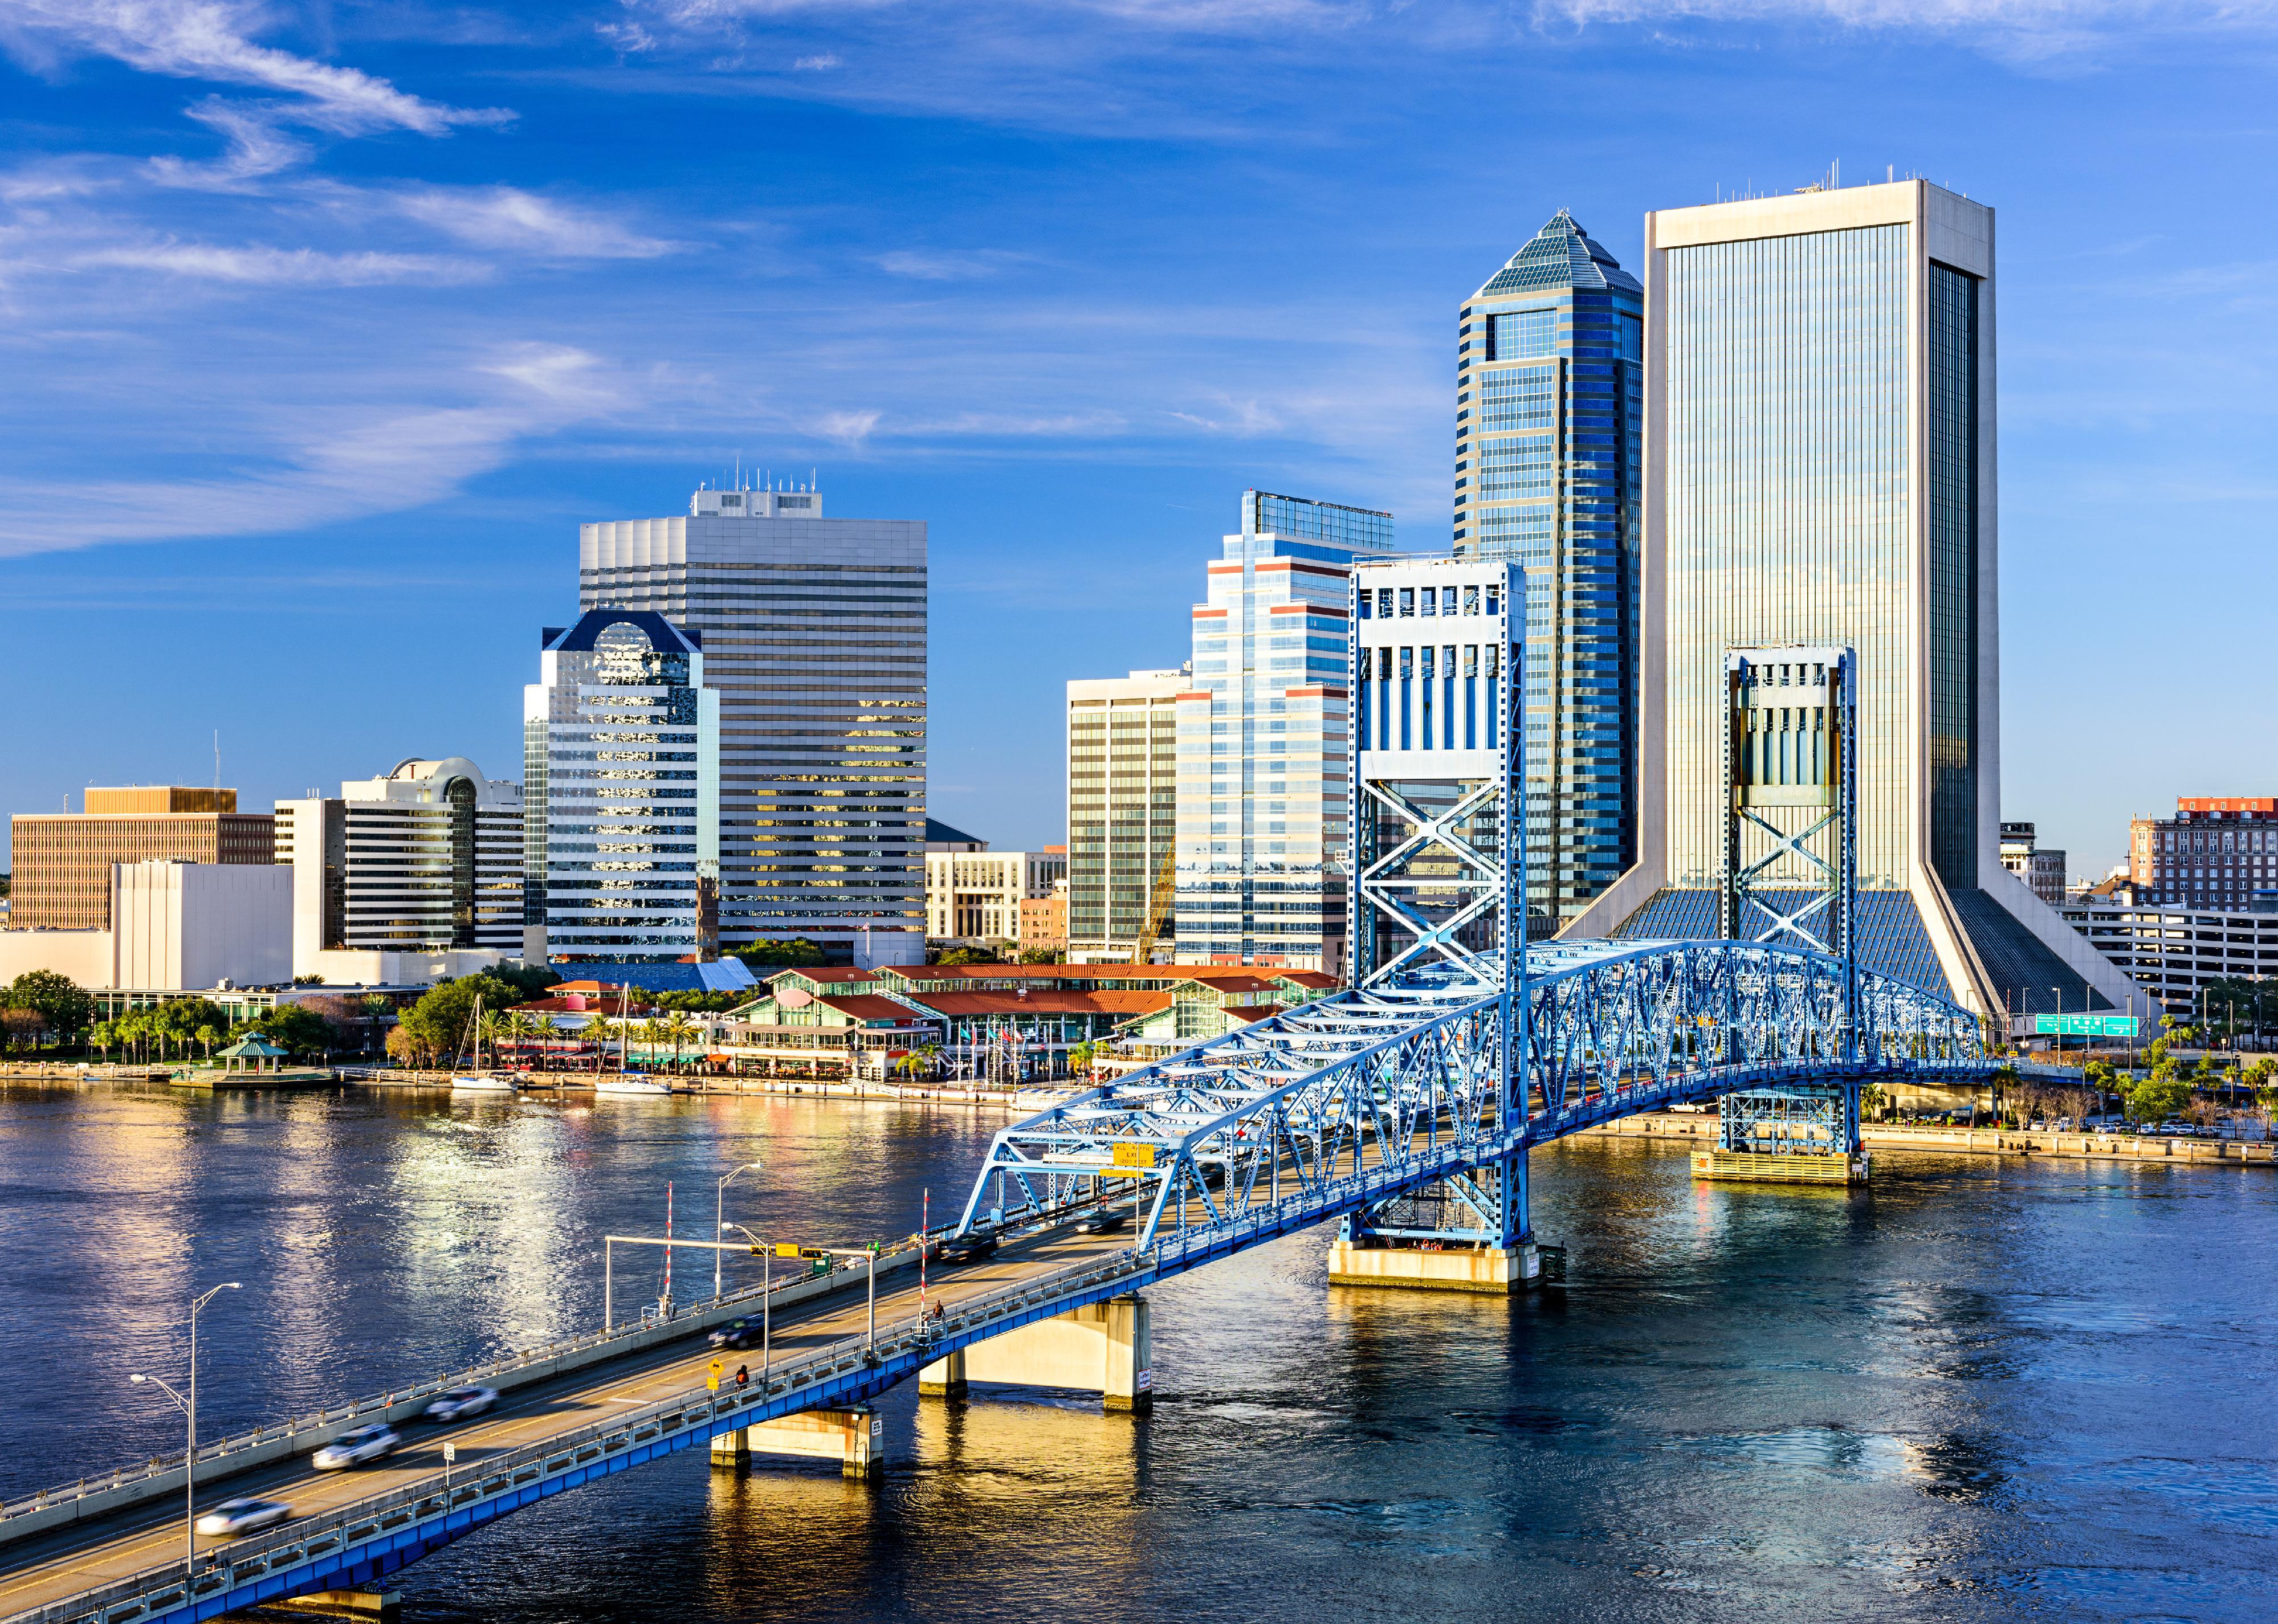 A photo of Jacksonville, Florida with the marina and bridge